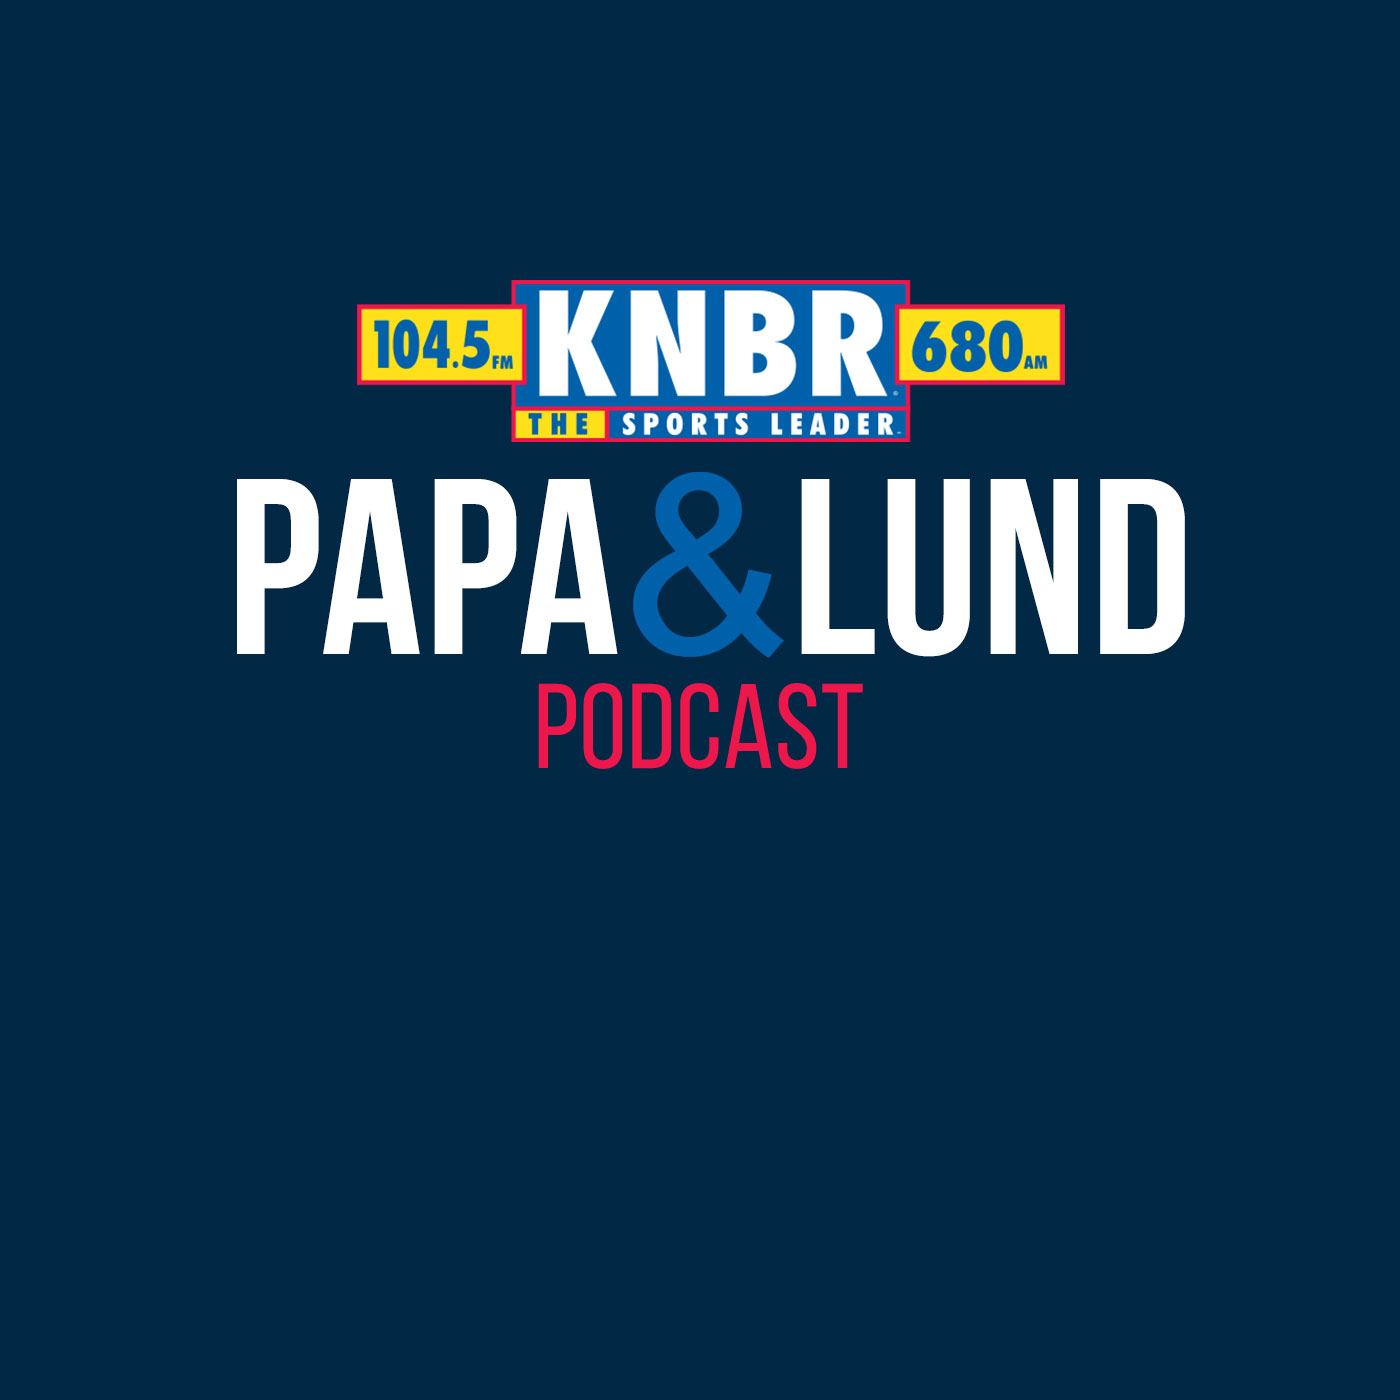 12-8 Kevin Burkhardt joins Papa & Lund to break down the Niners looking like the best team in the NFL